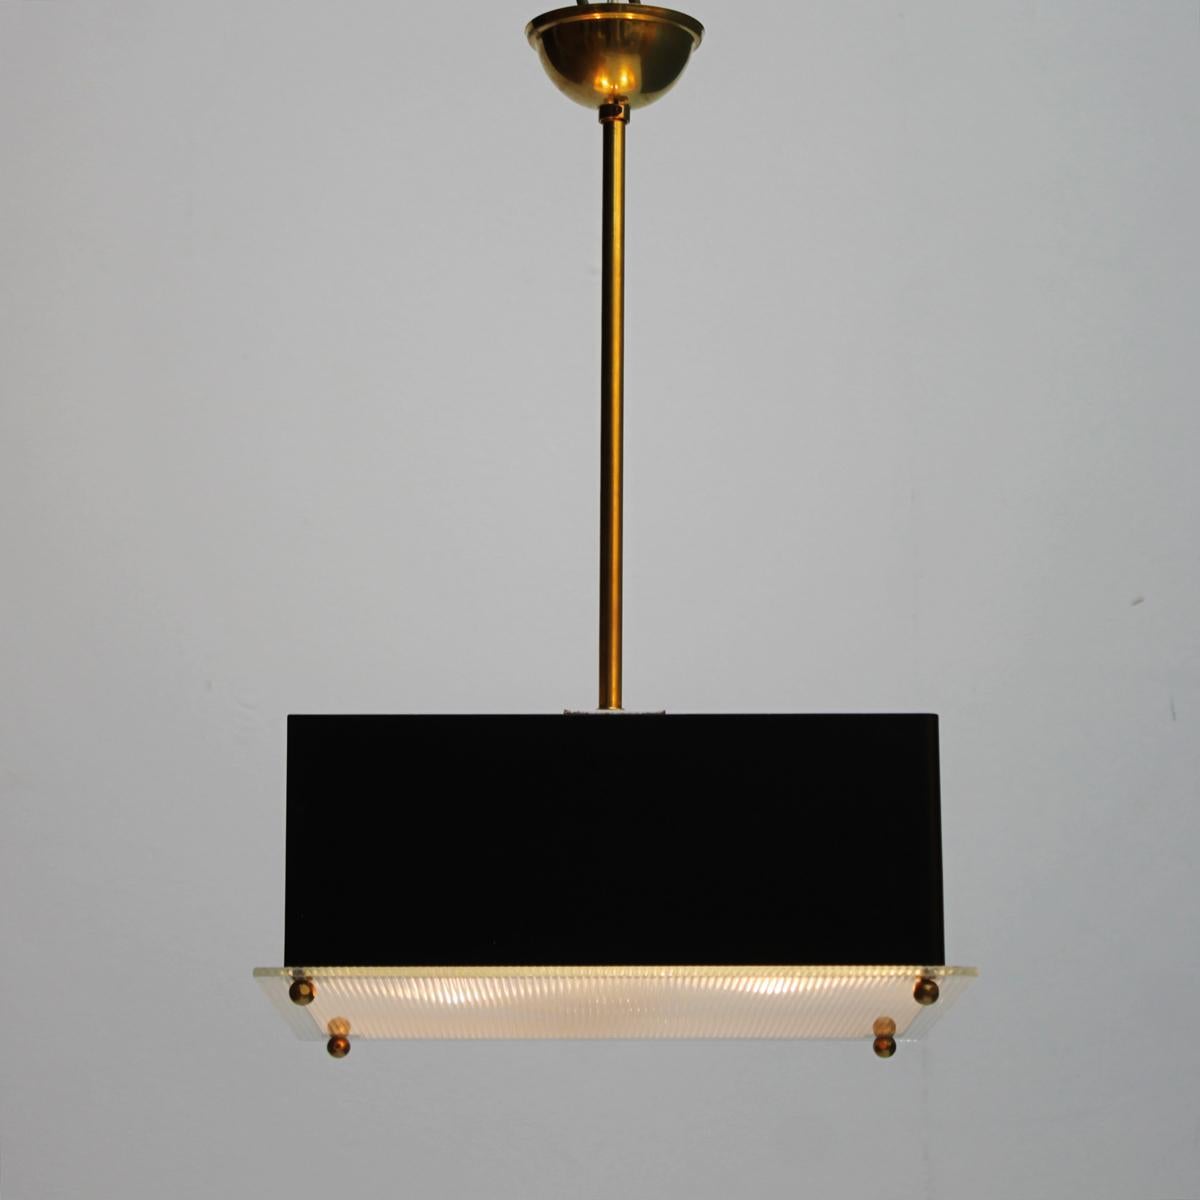 French Modernist Pendant by Maison Arlus, France